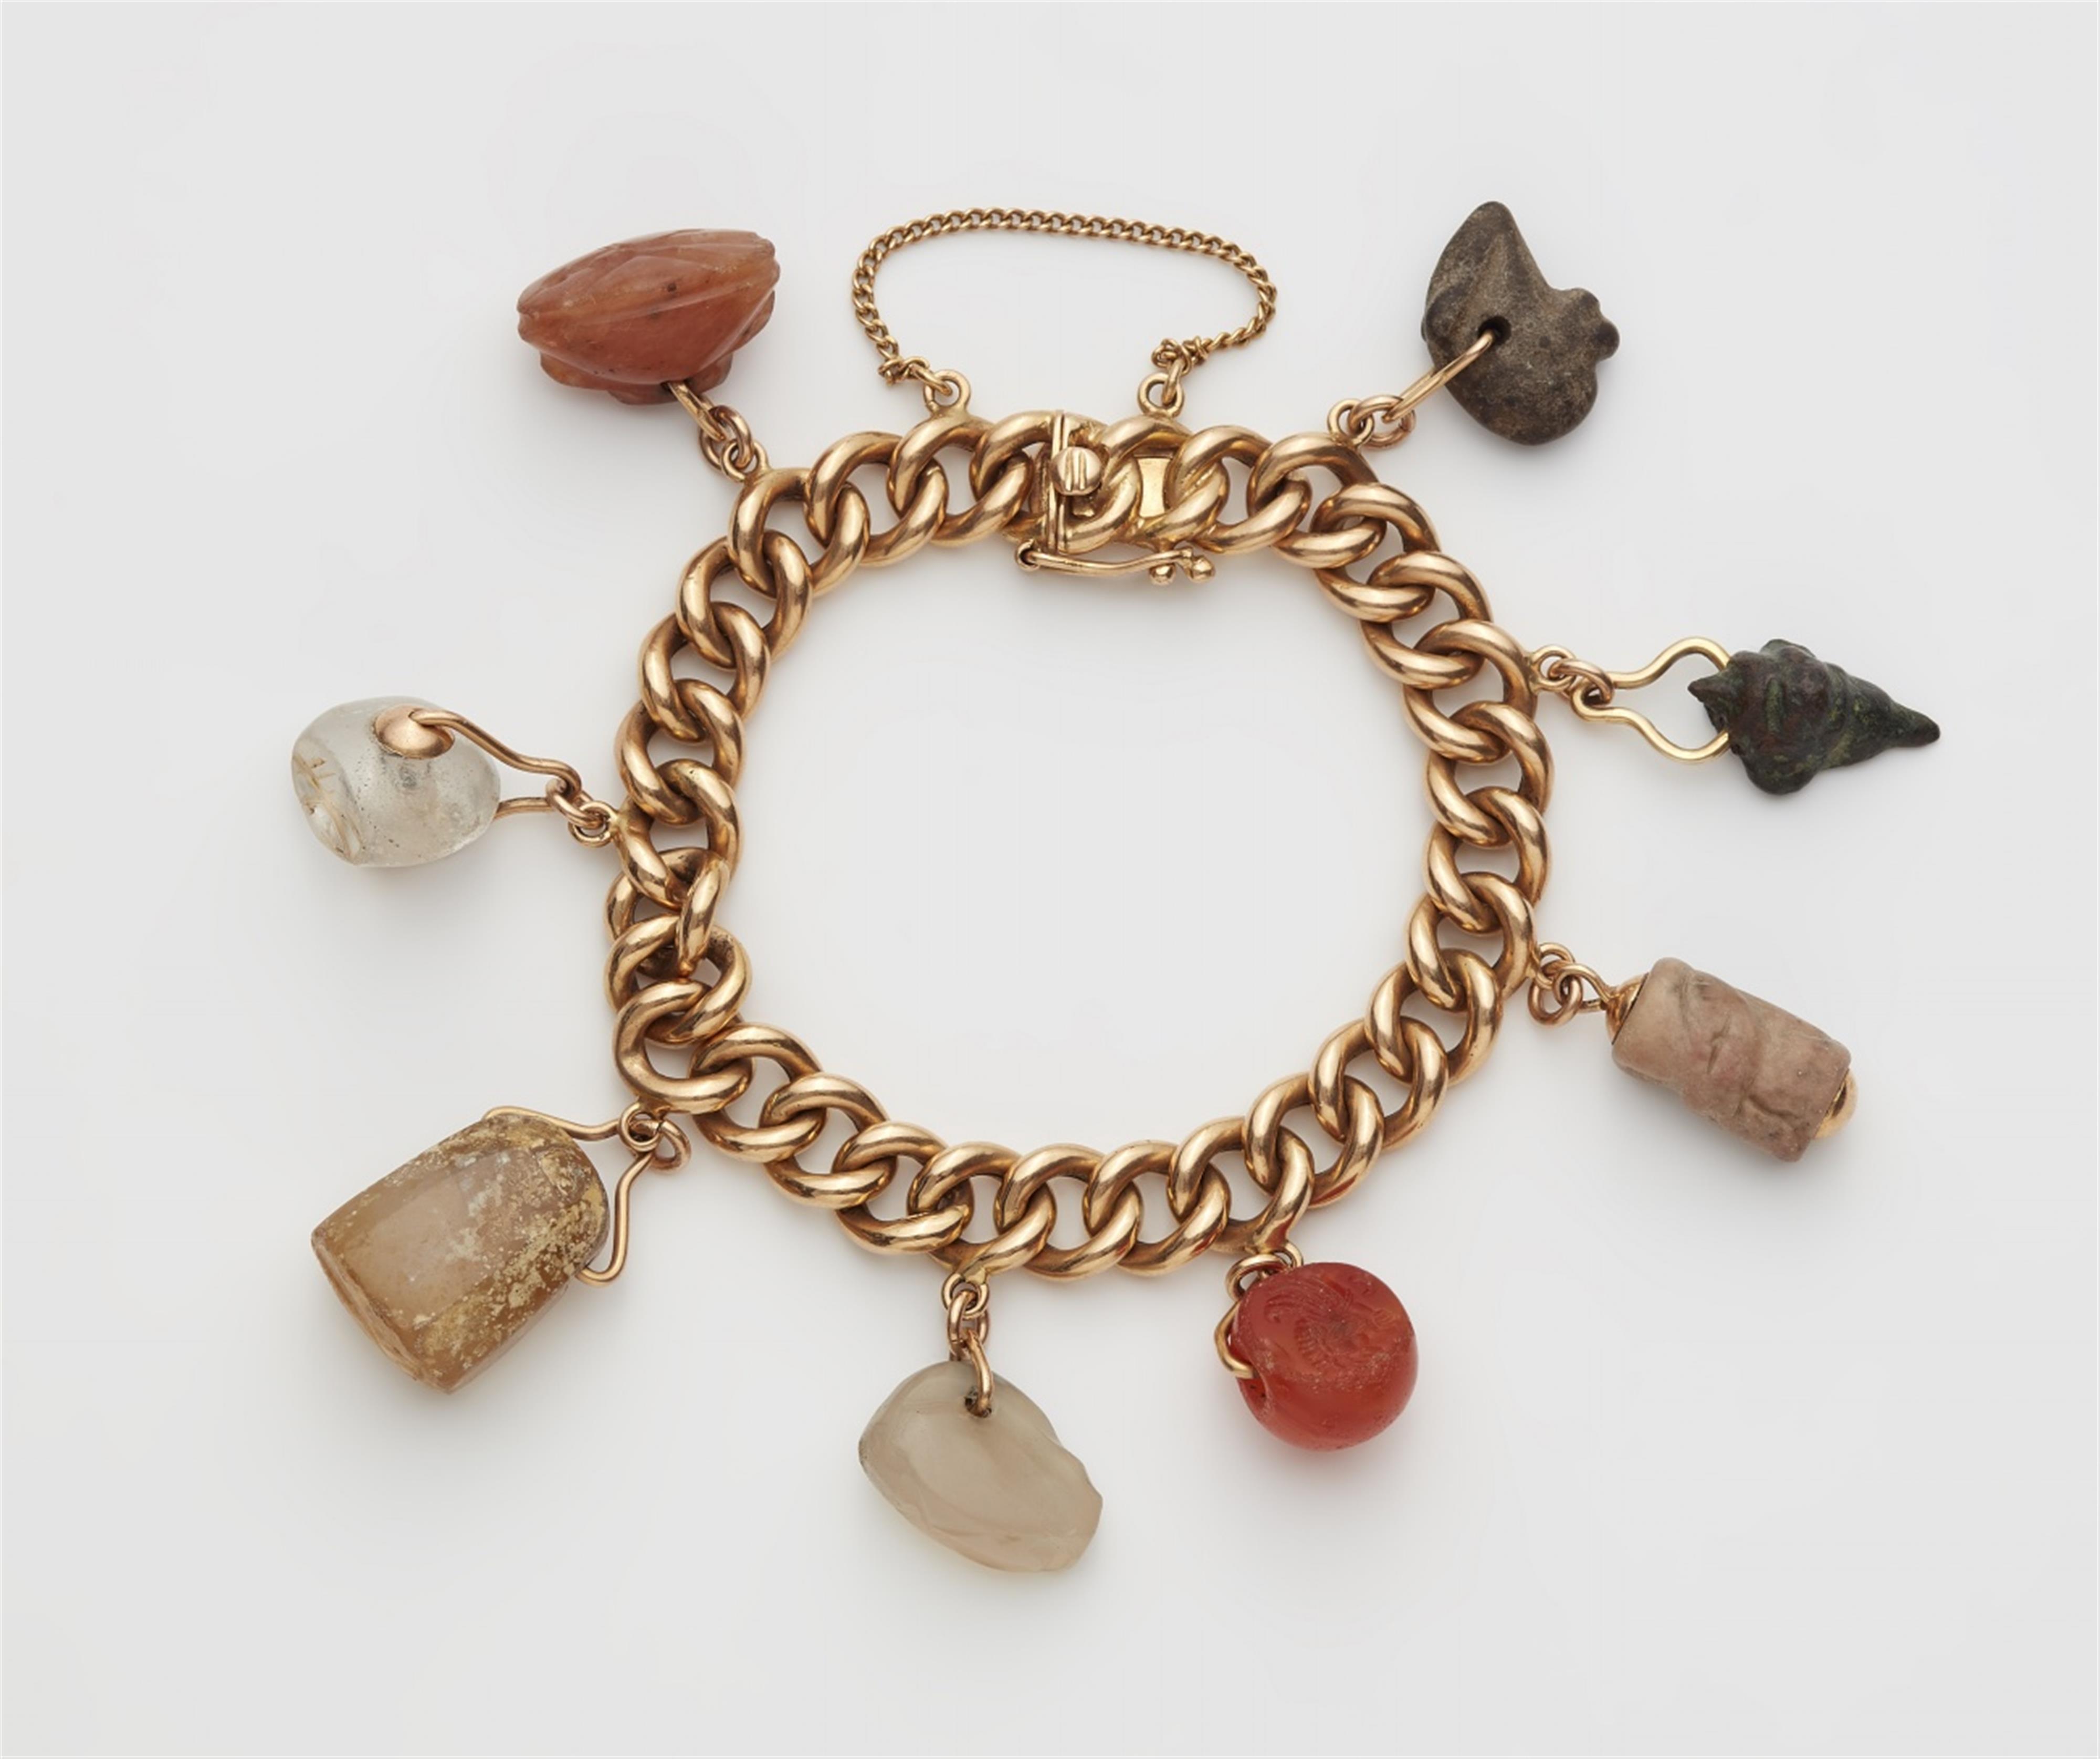 An 18k red gold charm bracelet with ancient amulets - image-1